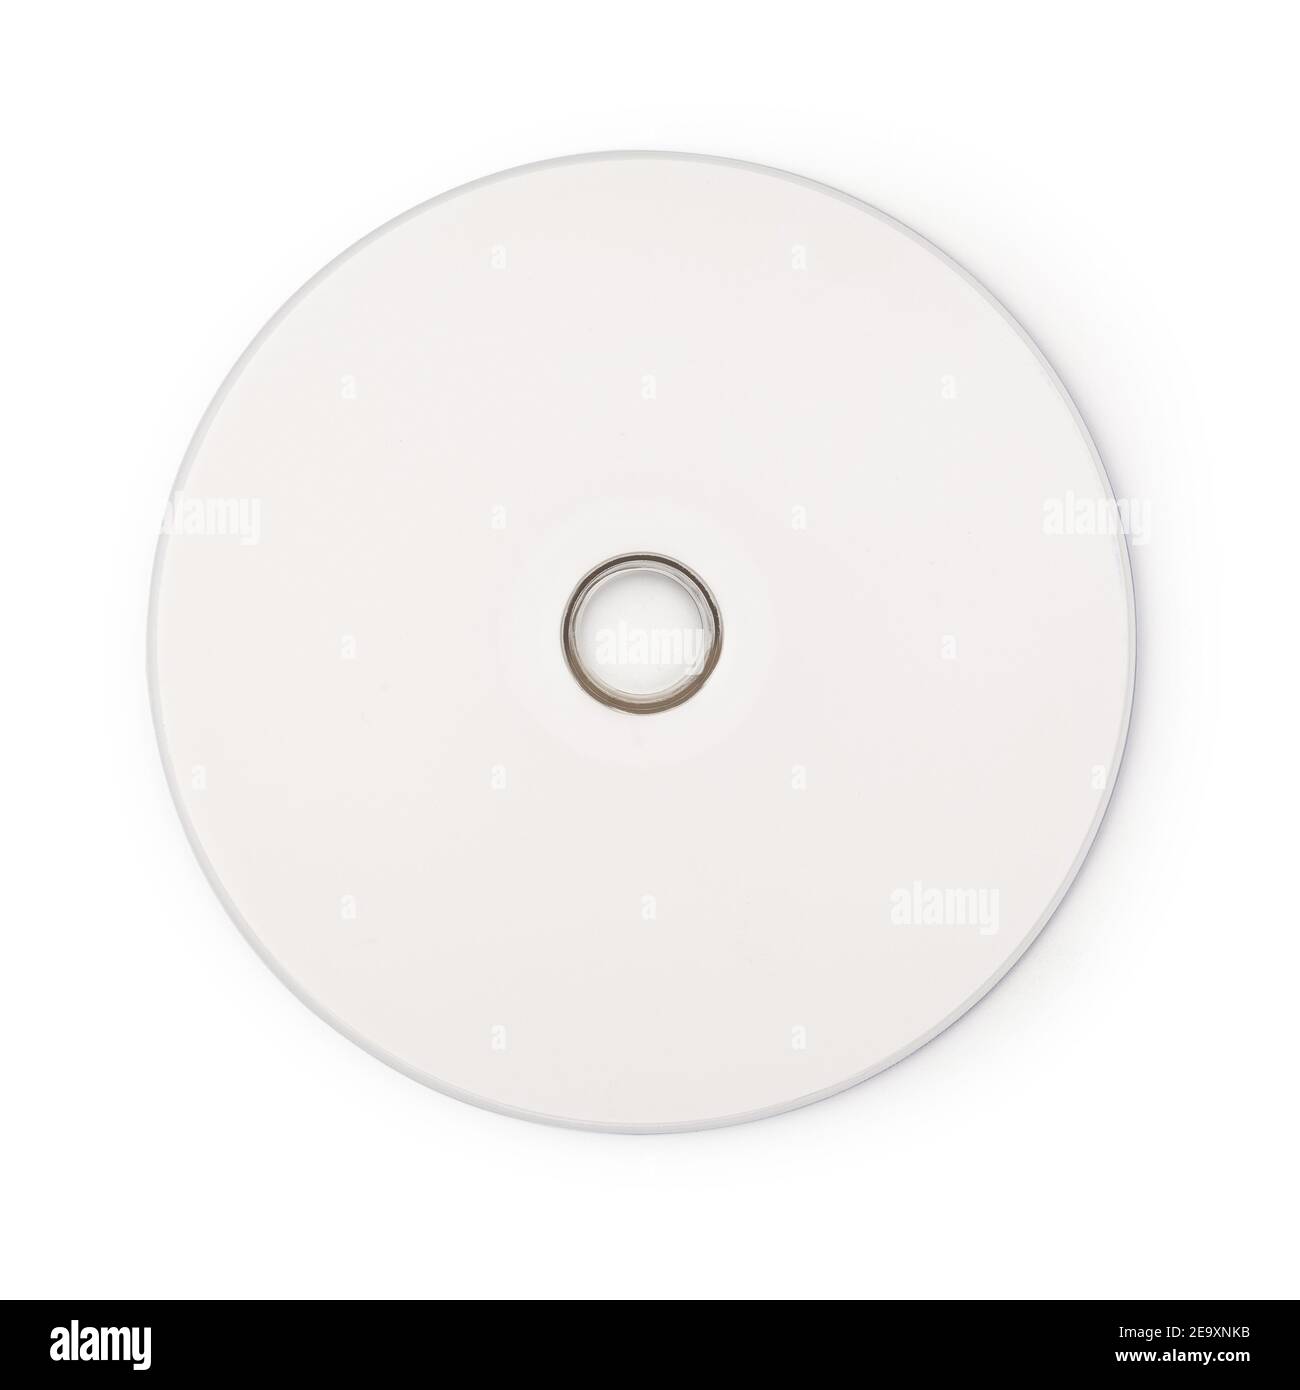 Realistic white cd template isolated on white background with clipping path. Stock Photo